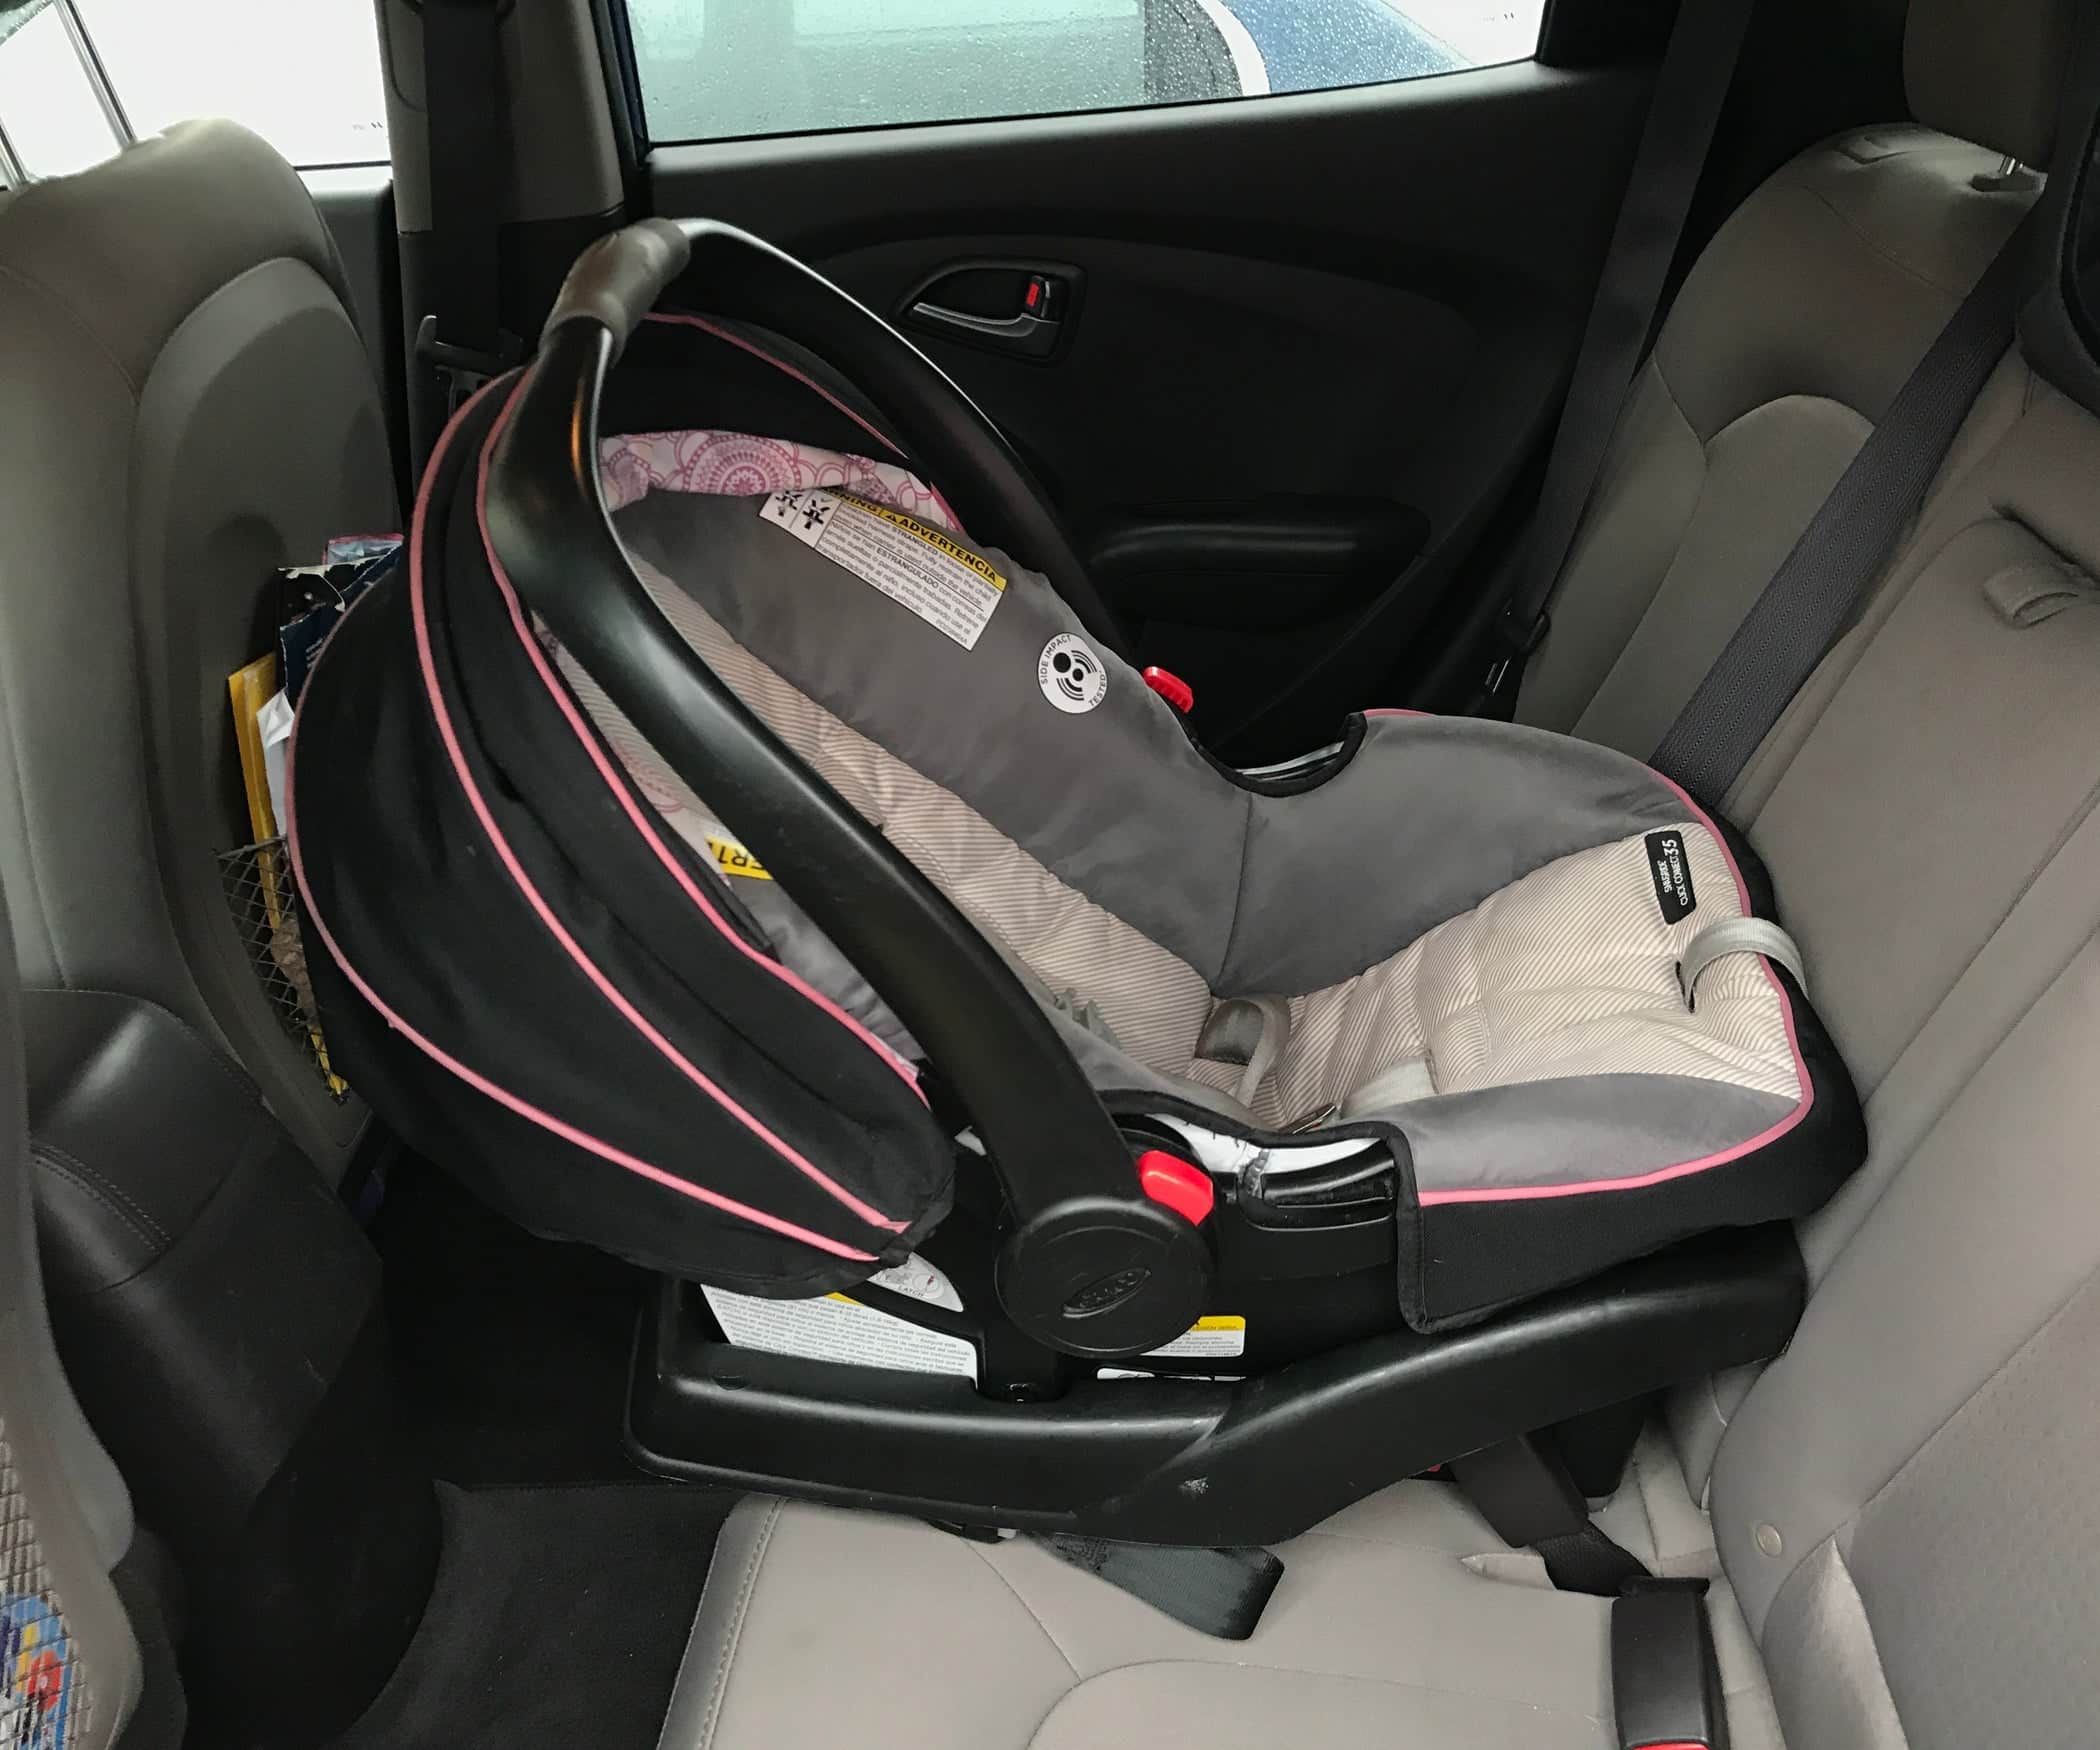 How to Properly Install an Infant Car Seat: 8 Steps (with Pictures)